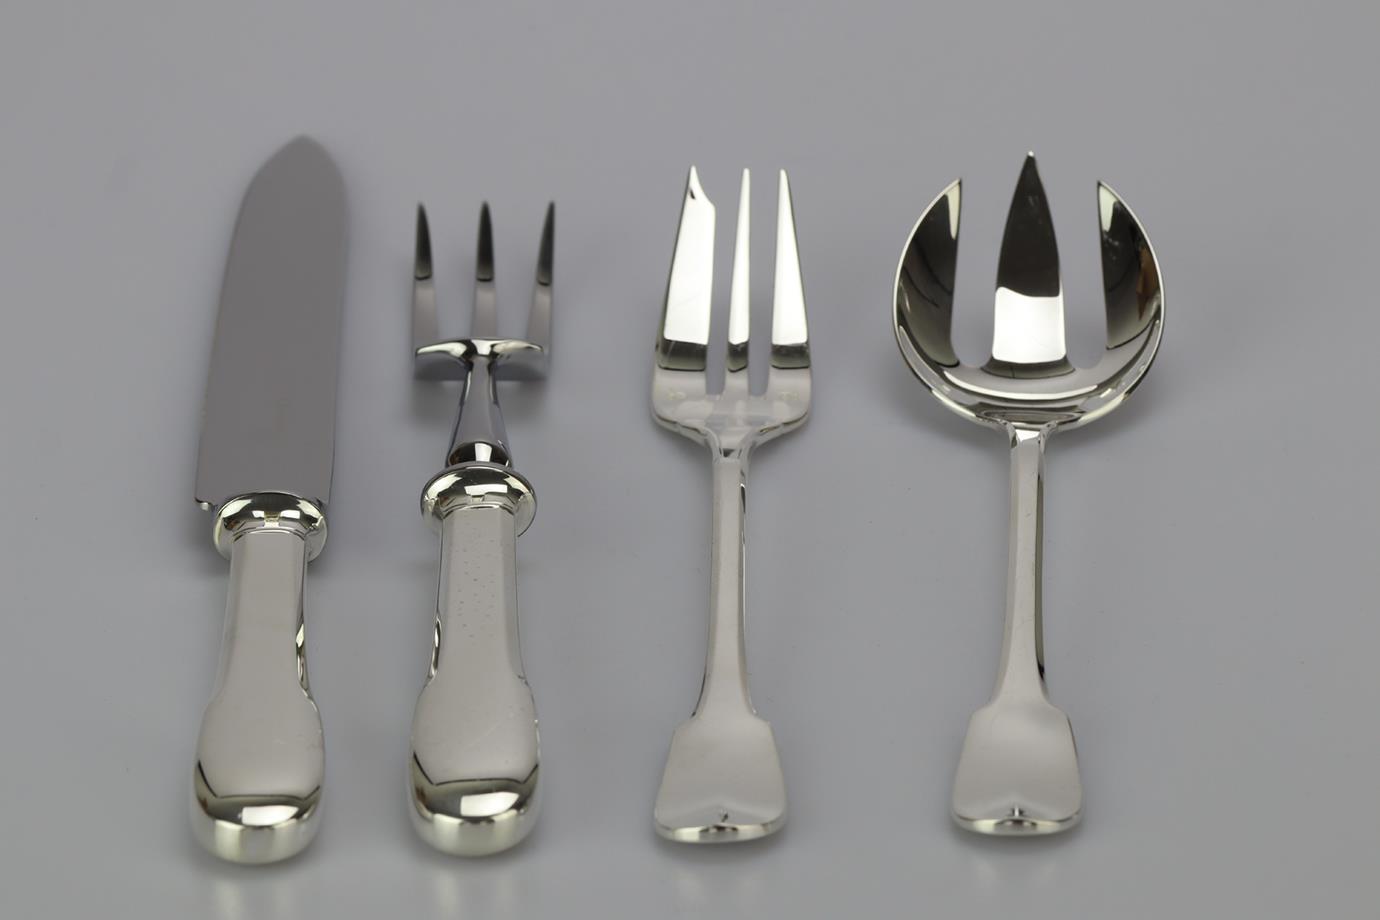 CHRISTOFLE SILVER PLATED STAINLESS STEEL CUTLERY SET